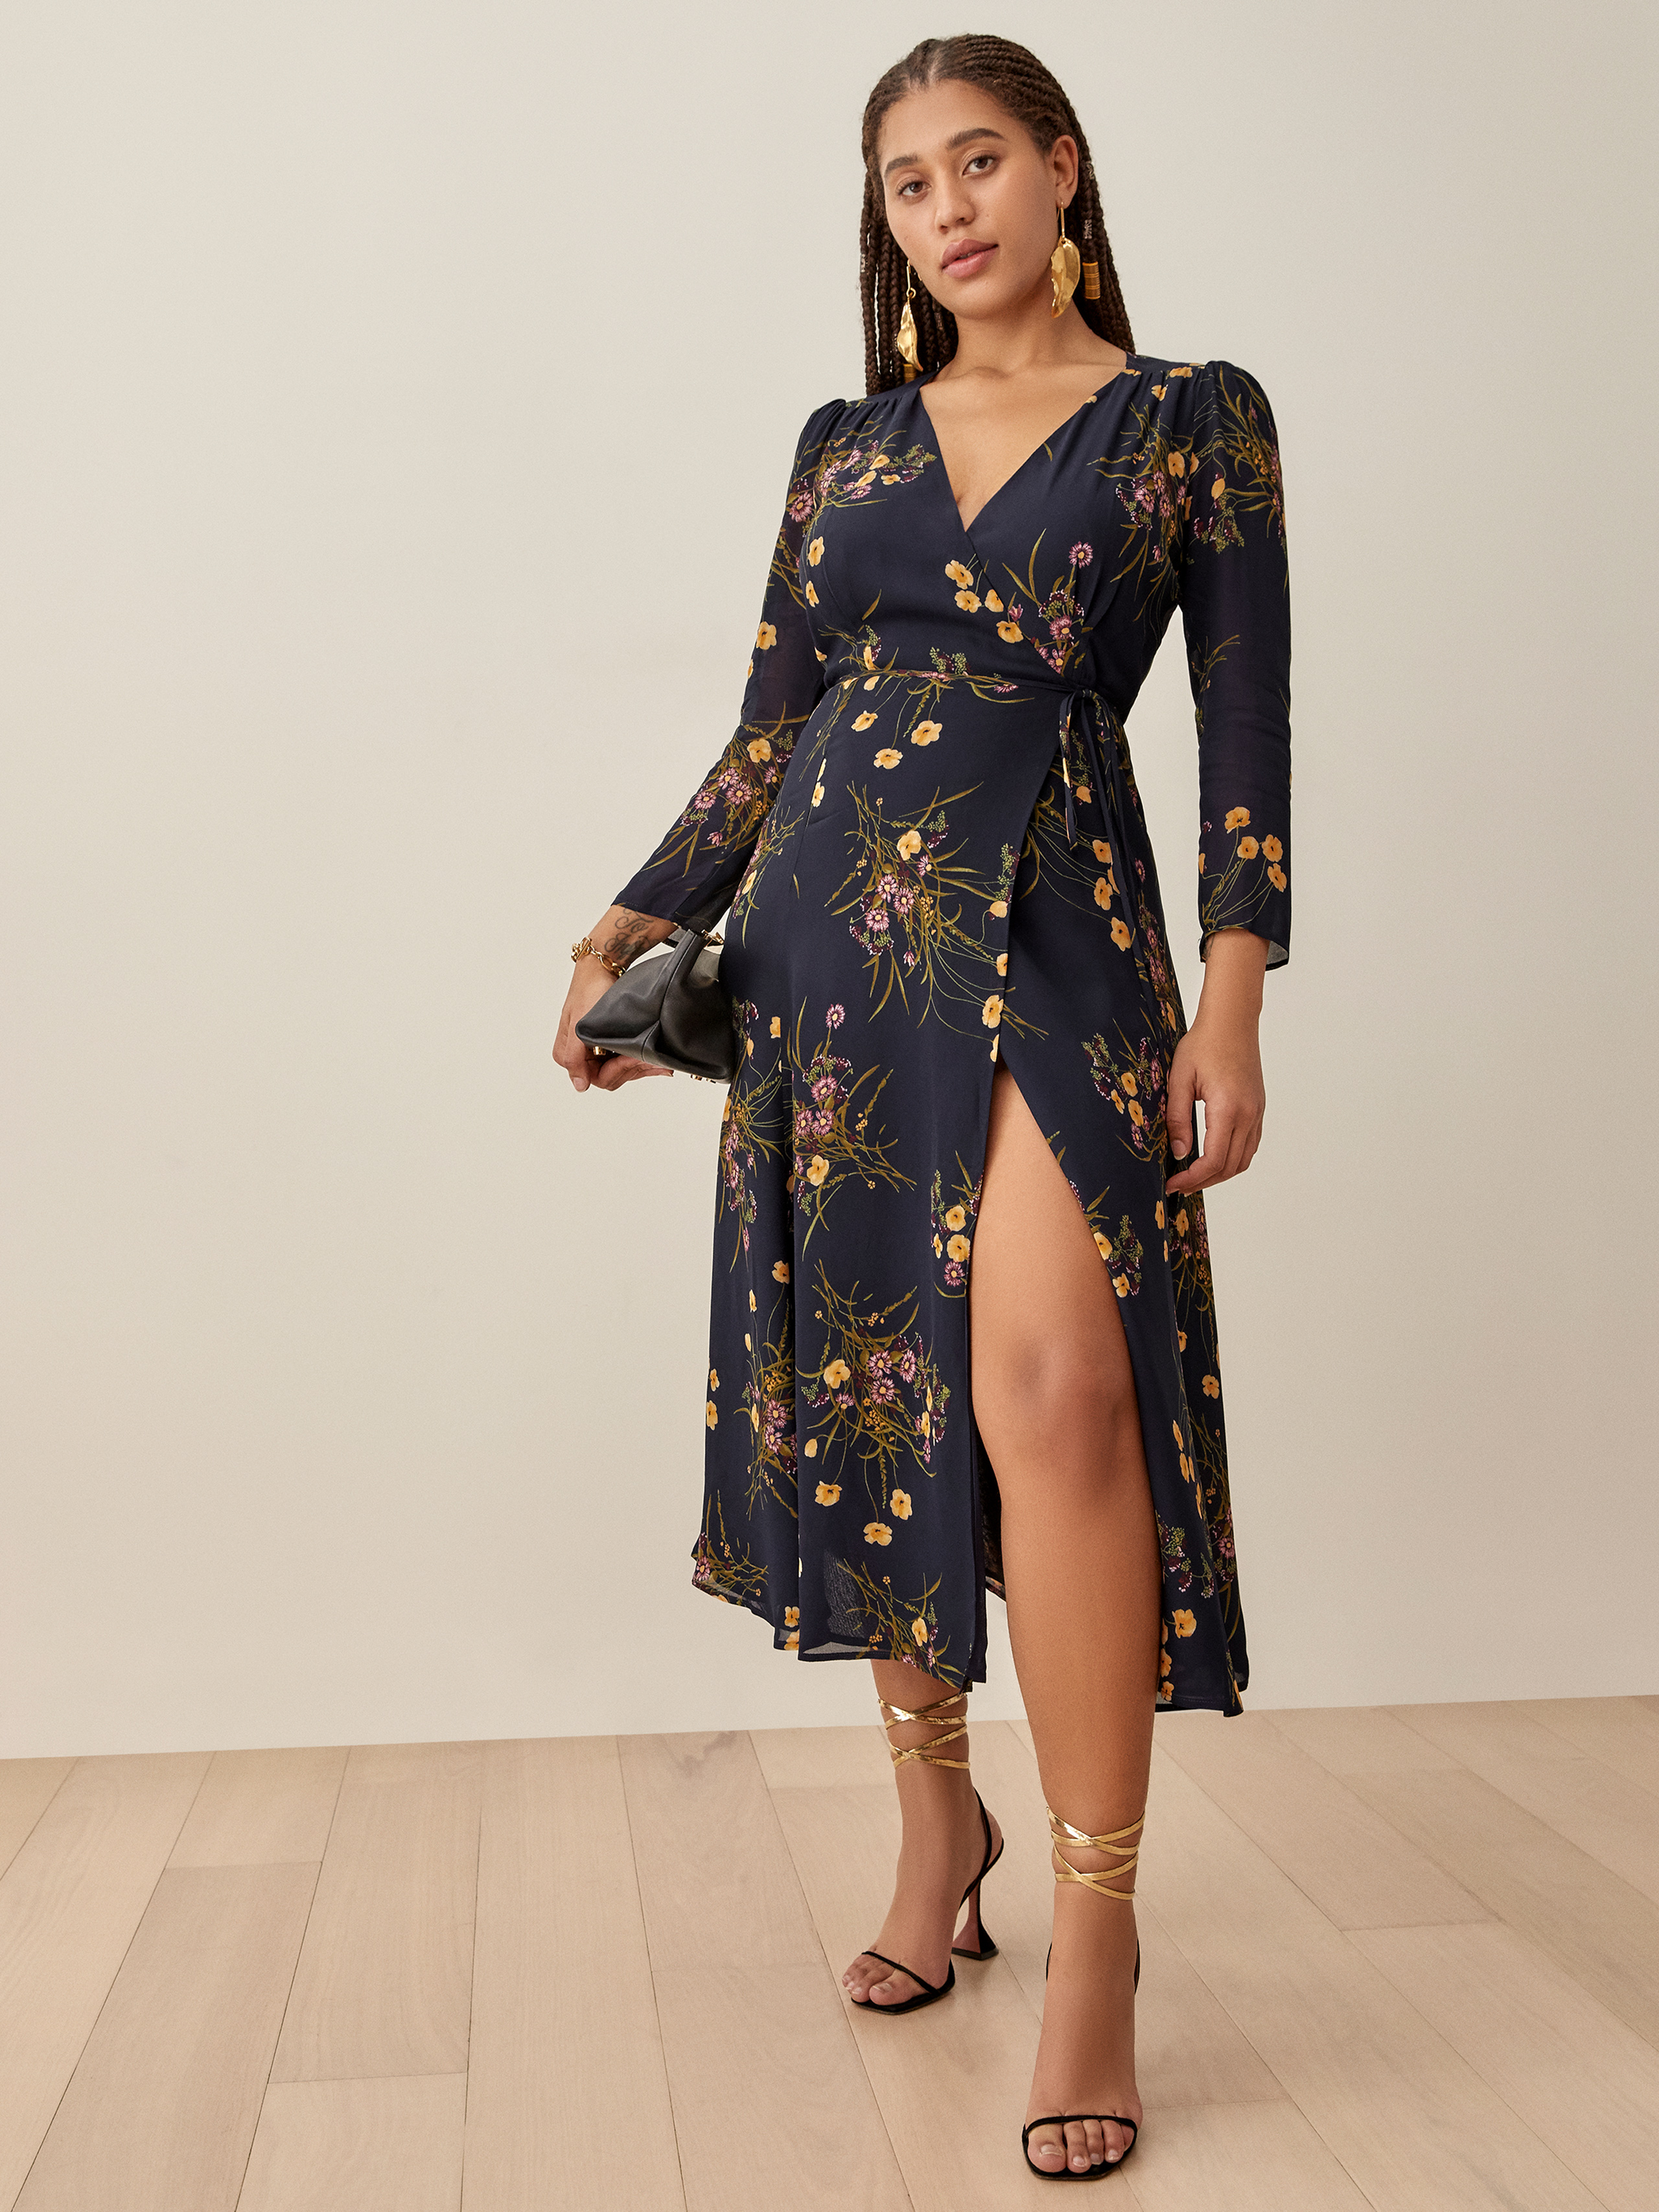 The Best Reformation Wedding Guest Dresses 2022 | Who What Wear UK